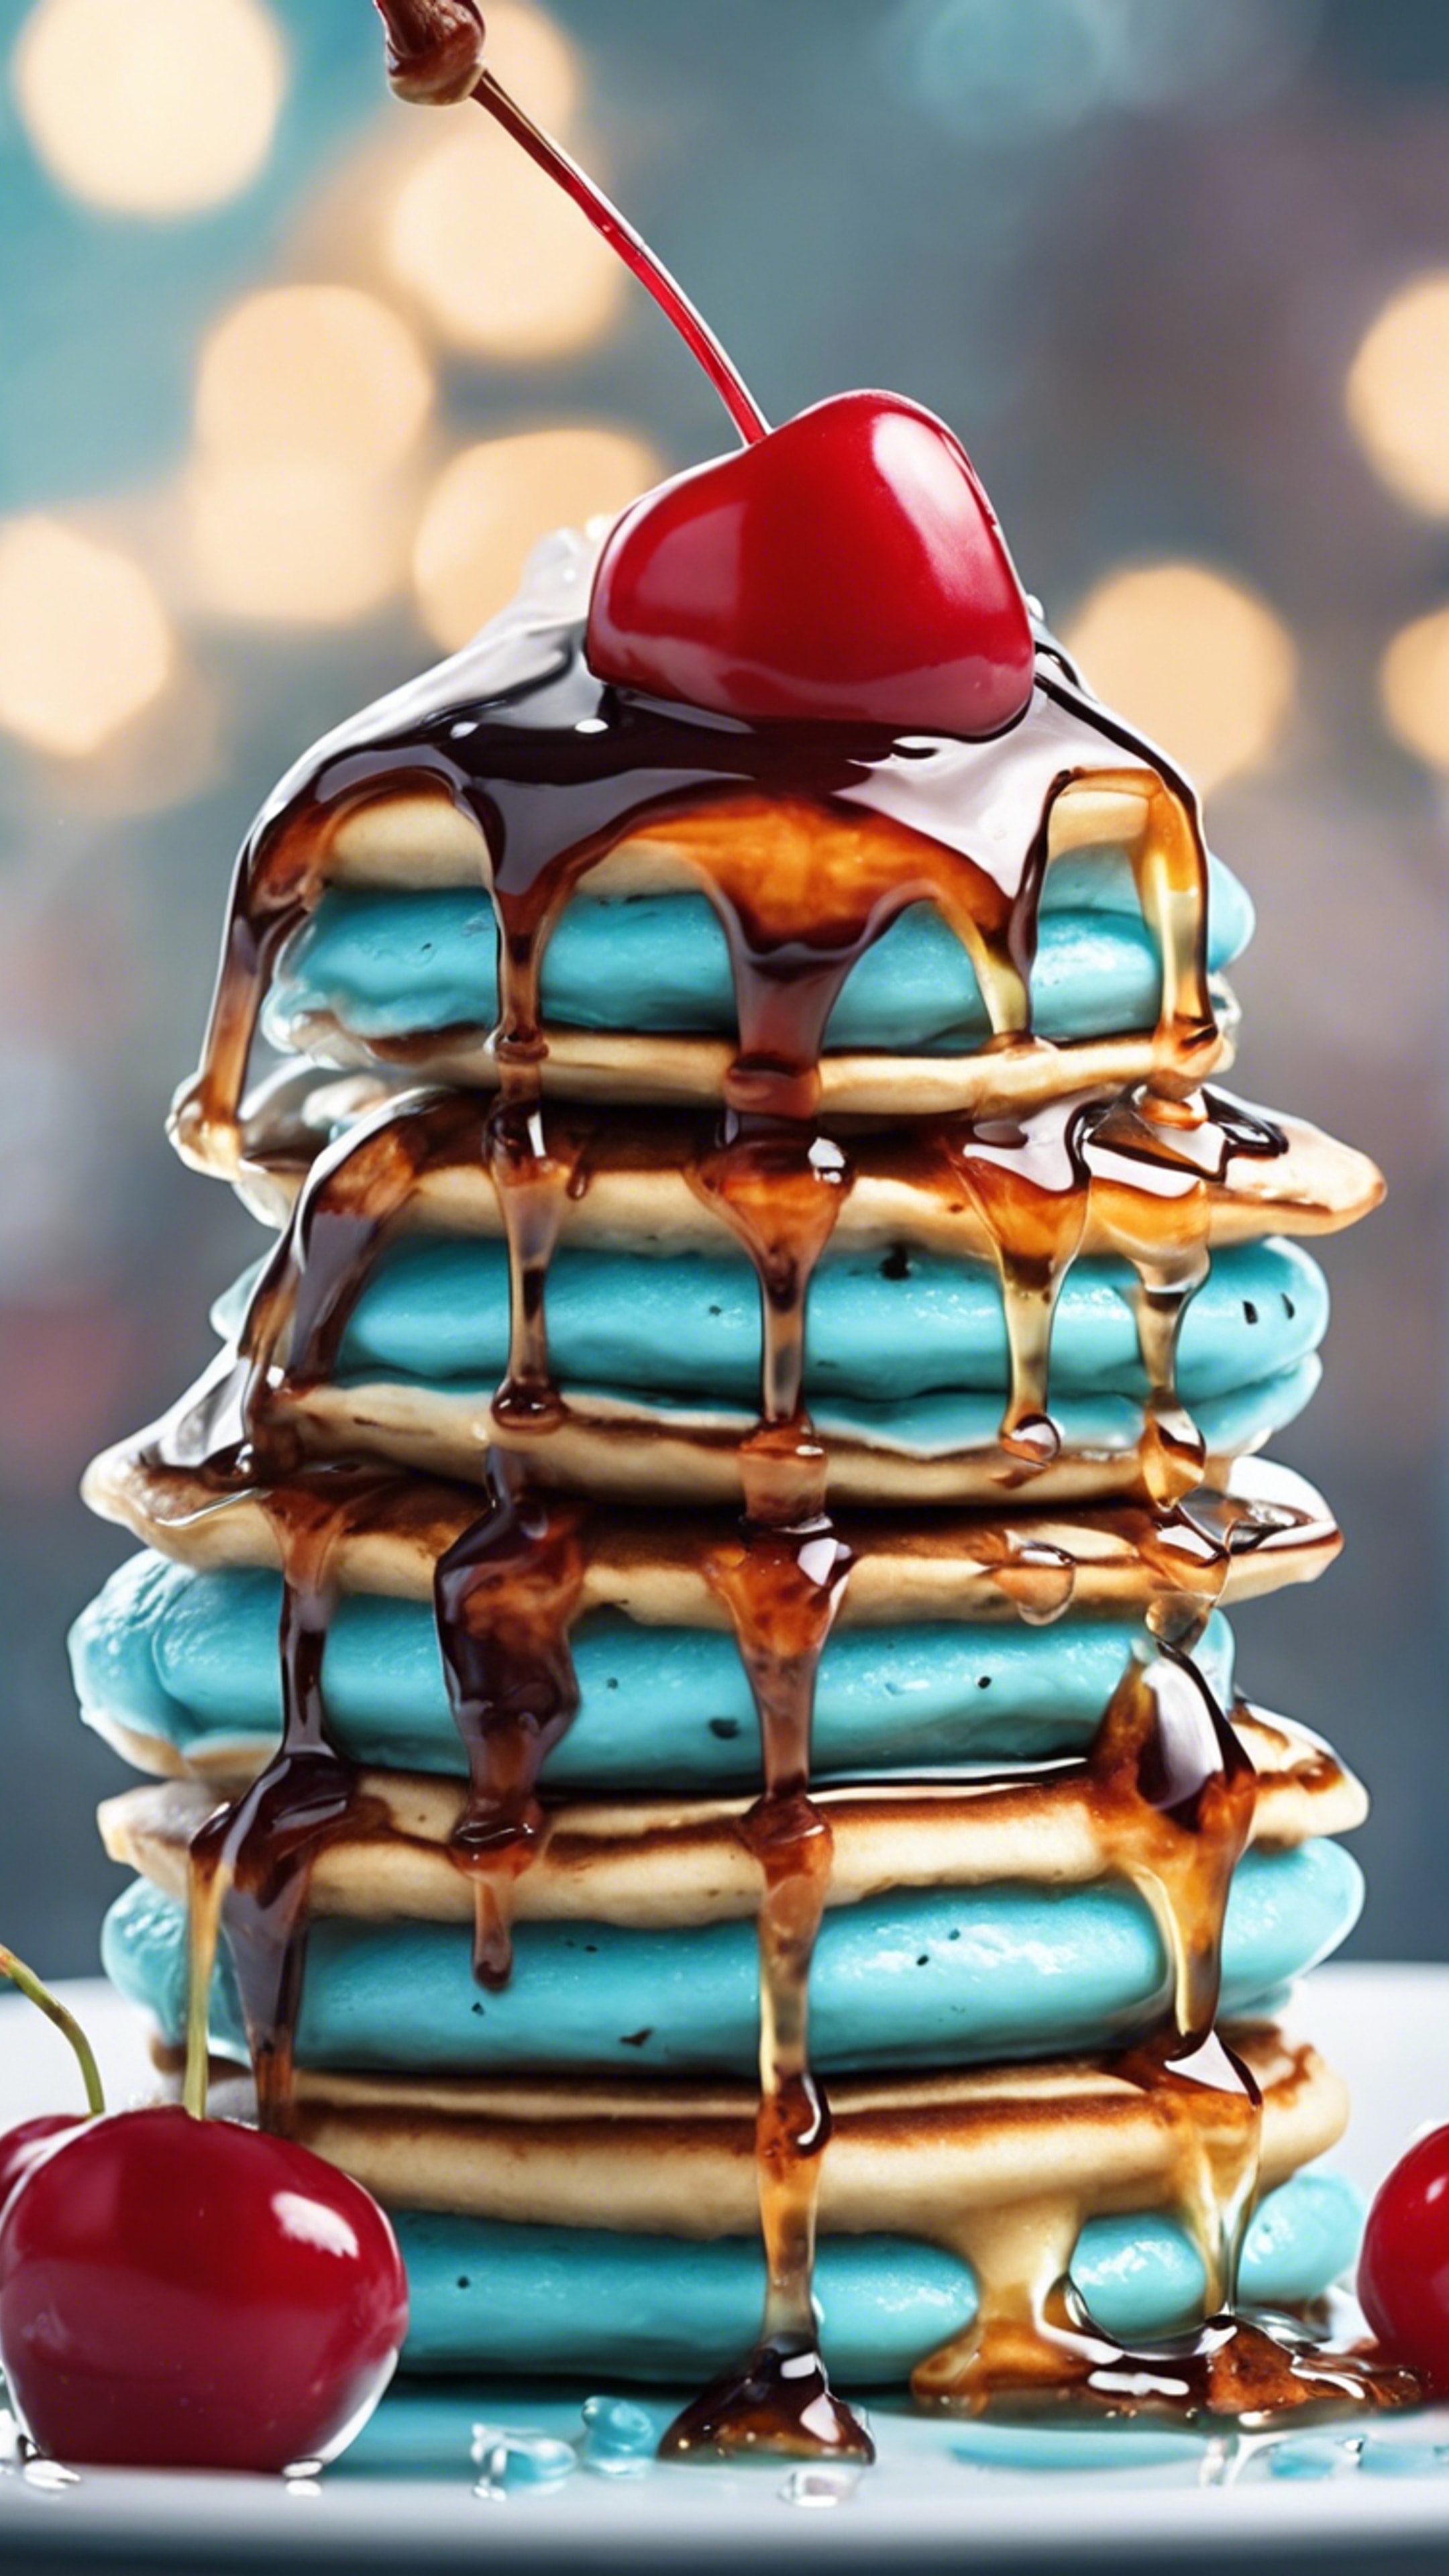 A stack of kawaii light blue pancakes dripping with syrup and a cherry on top. Tapeta[05c3a9af3a95463c8379]